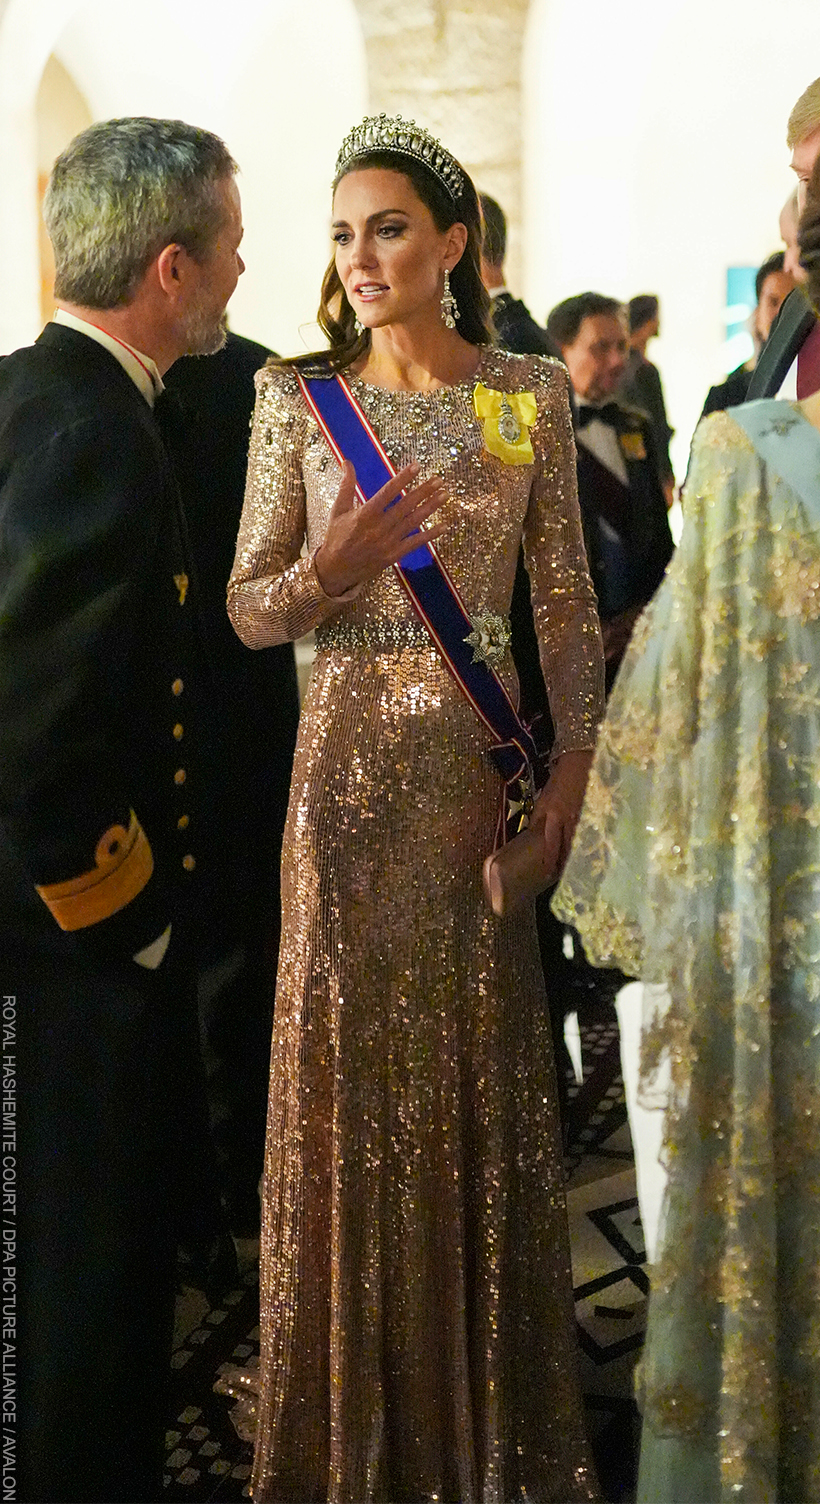 Kate Middleton chatting with guests at the Jordan Royal Wedding in 2023.  She wears the Queen Mary Lover's Knot Tiara with a shimmering pink gown.